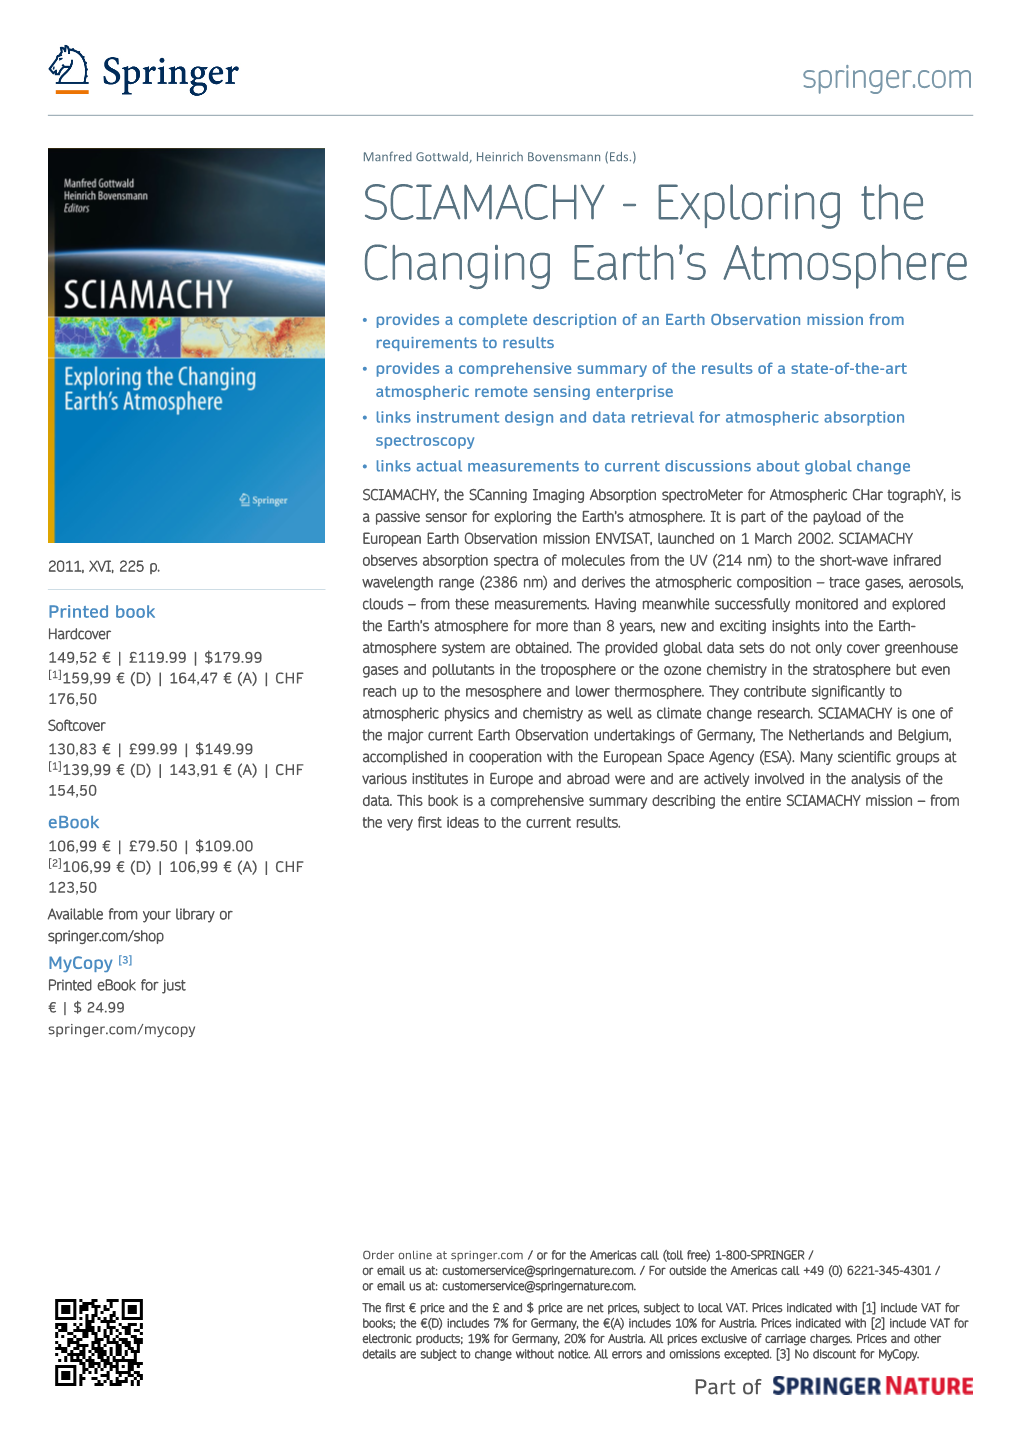 SCIAMACHY - Exploring the Changing Earth’S Atmosphere